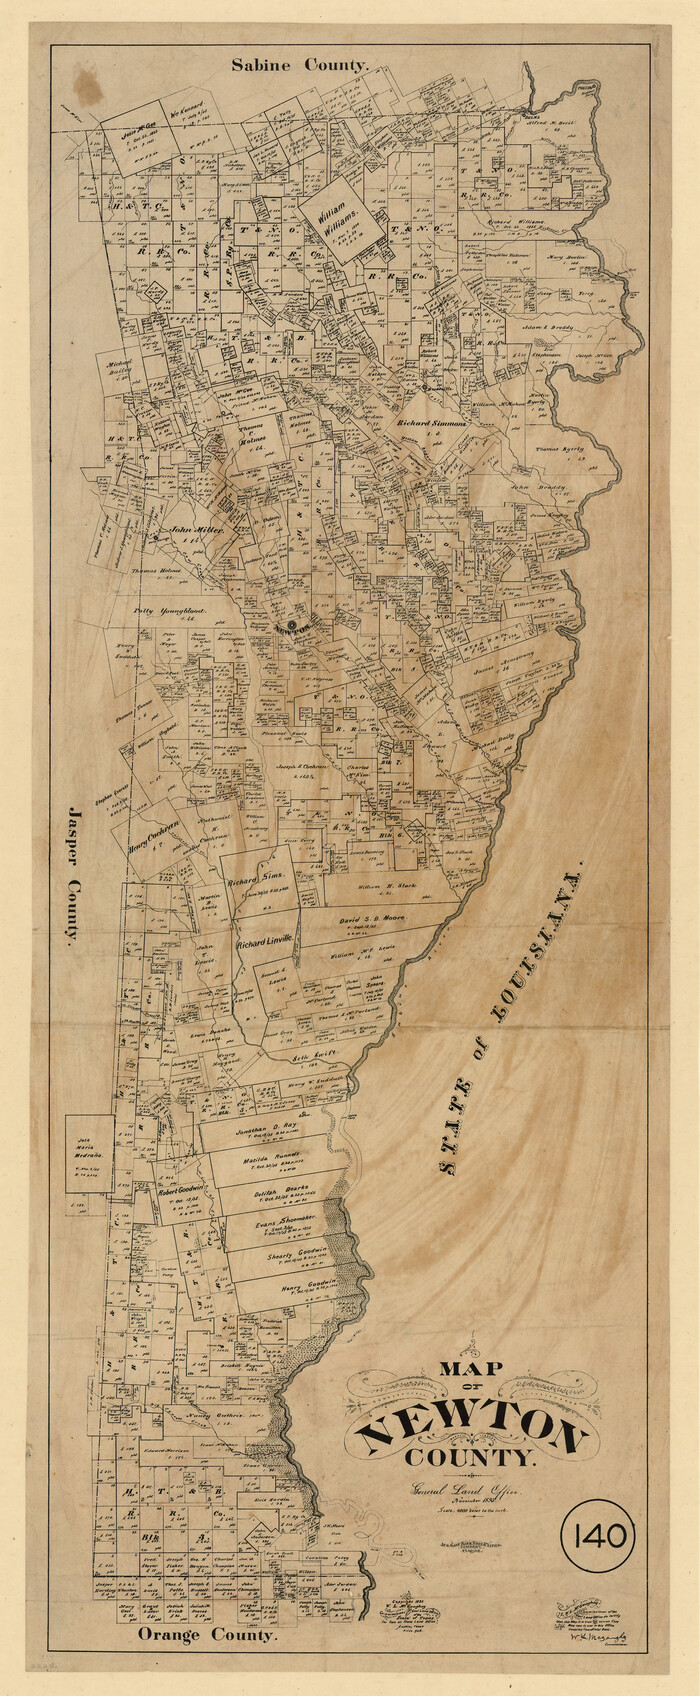 587, Map of Newton County, Texas, Maddox Collection